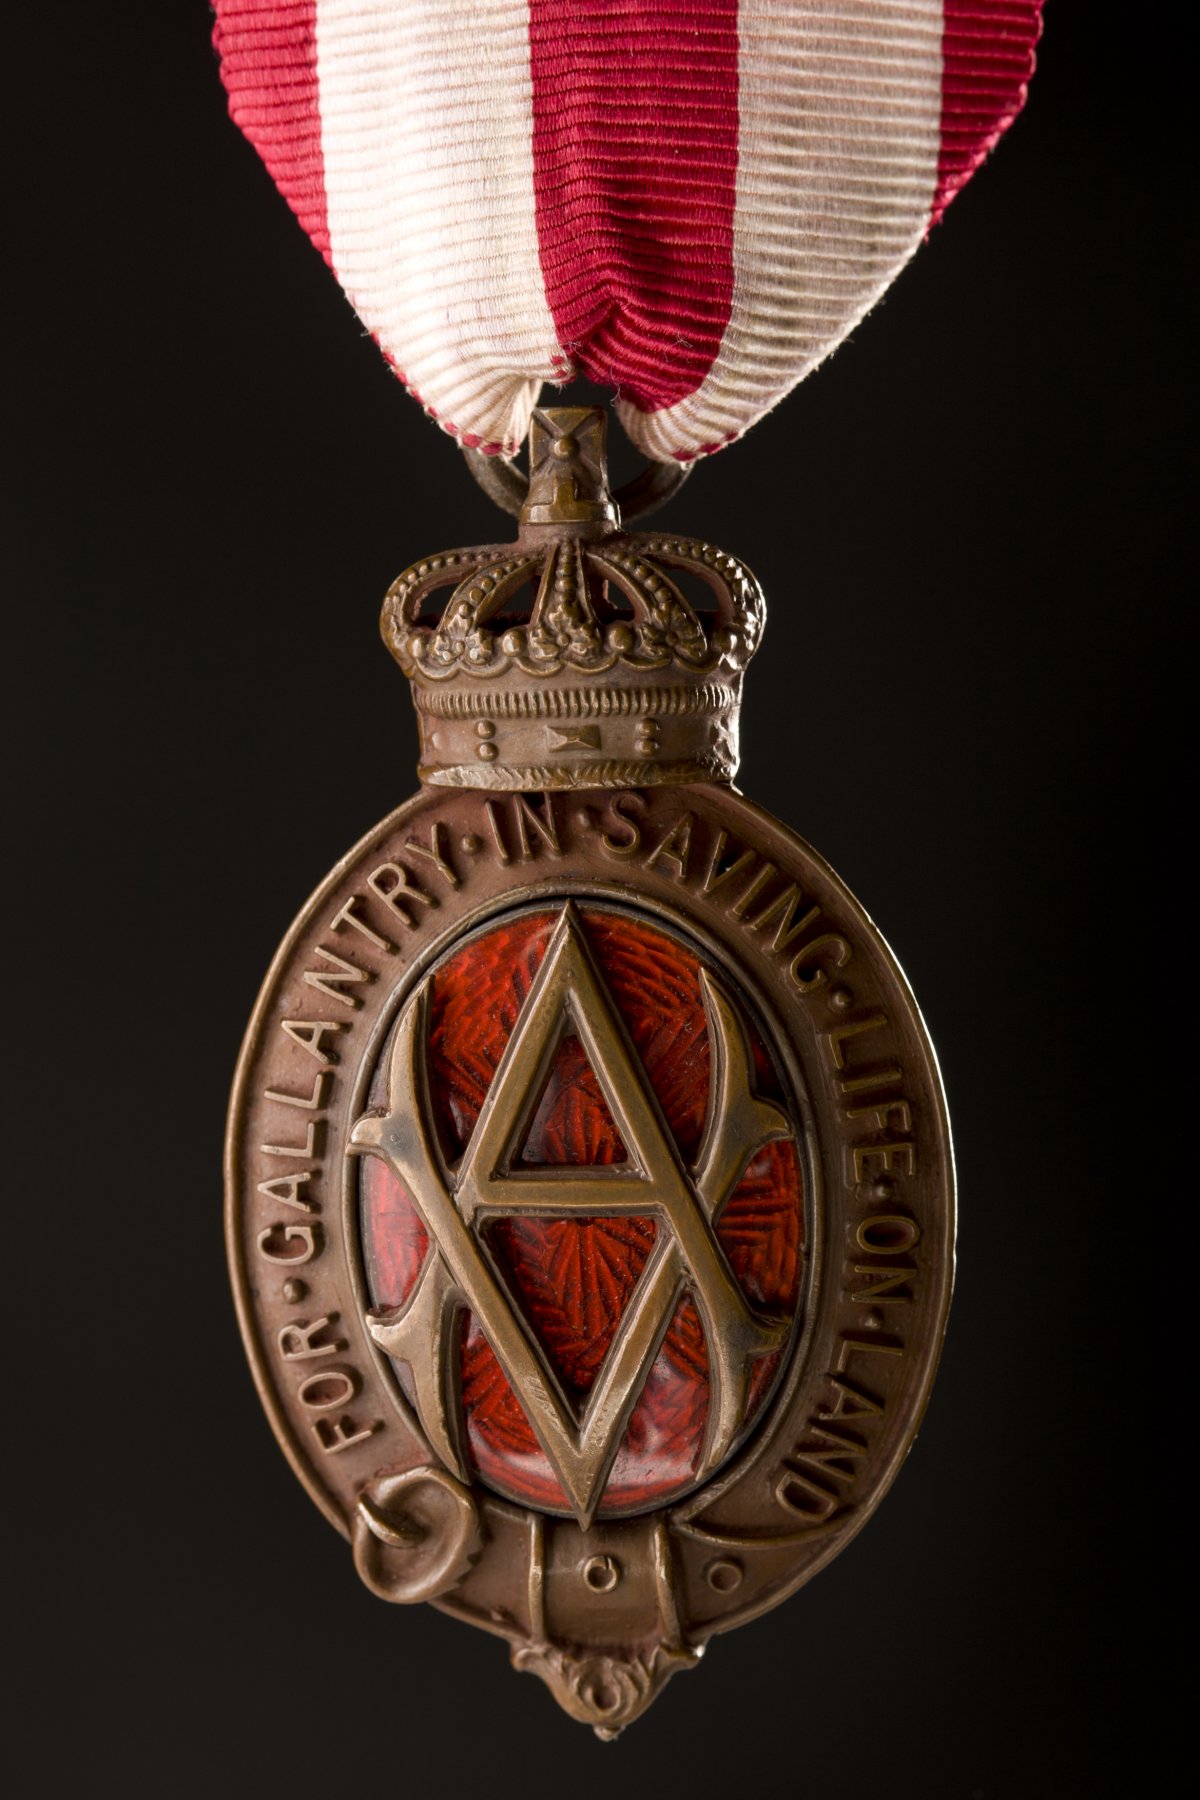 An oval shaped bronze medal. The oval is made of a belt buckled at the bottom. At the top is a stylised royal crown. In the centre of the oval is a monogram made up of an intertwined "V.A." Behind the monogram is pattered red glass. Around the oval in raised letters are the words "For gallantry in saving life on land". The medal is held by a ribbon of red and white vertical stripes 